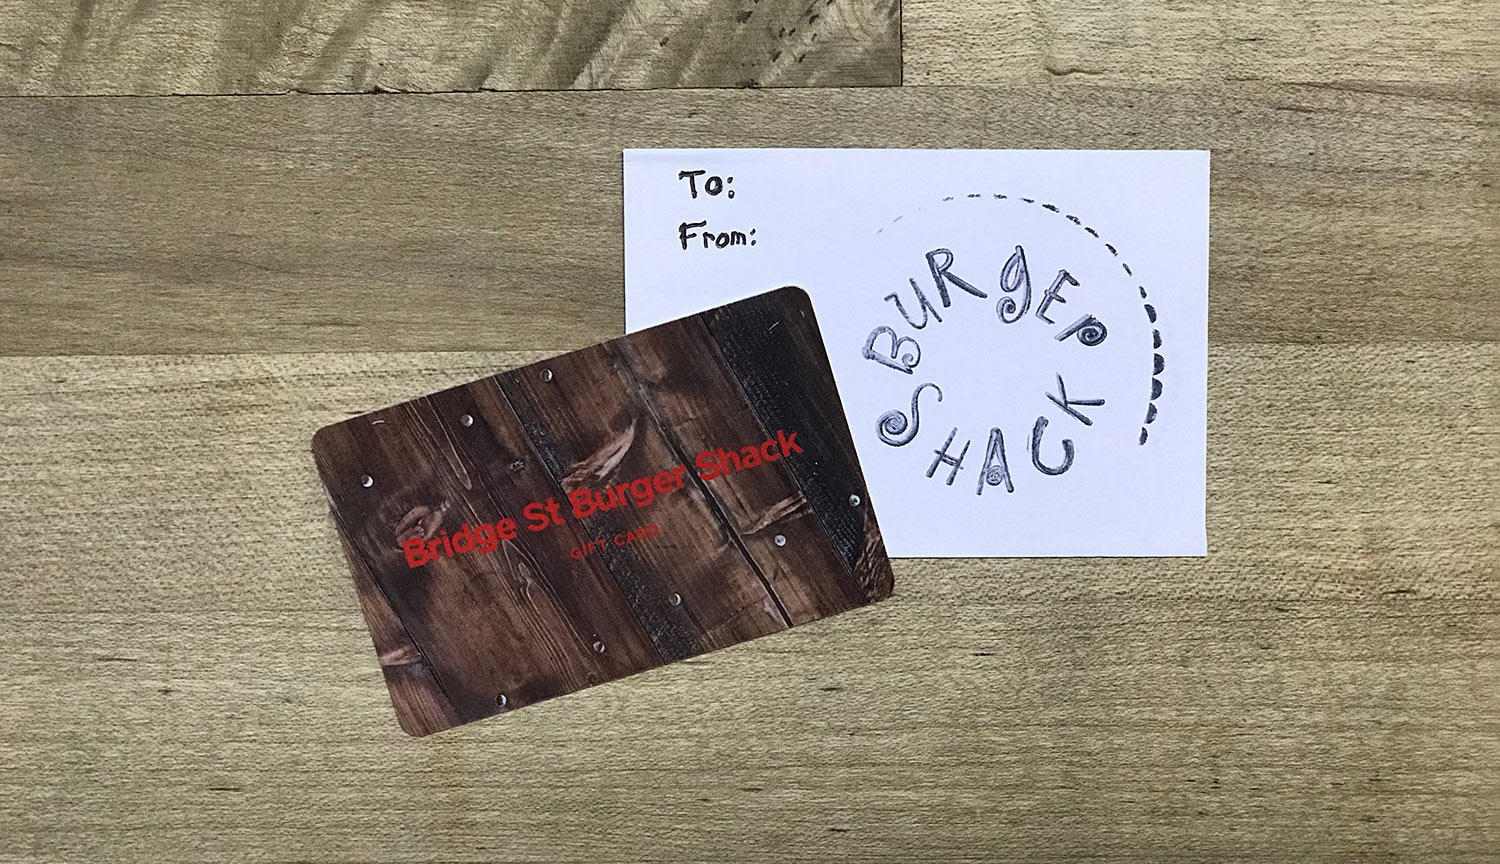 Burger Shack Gift Cards and Merhandise